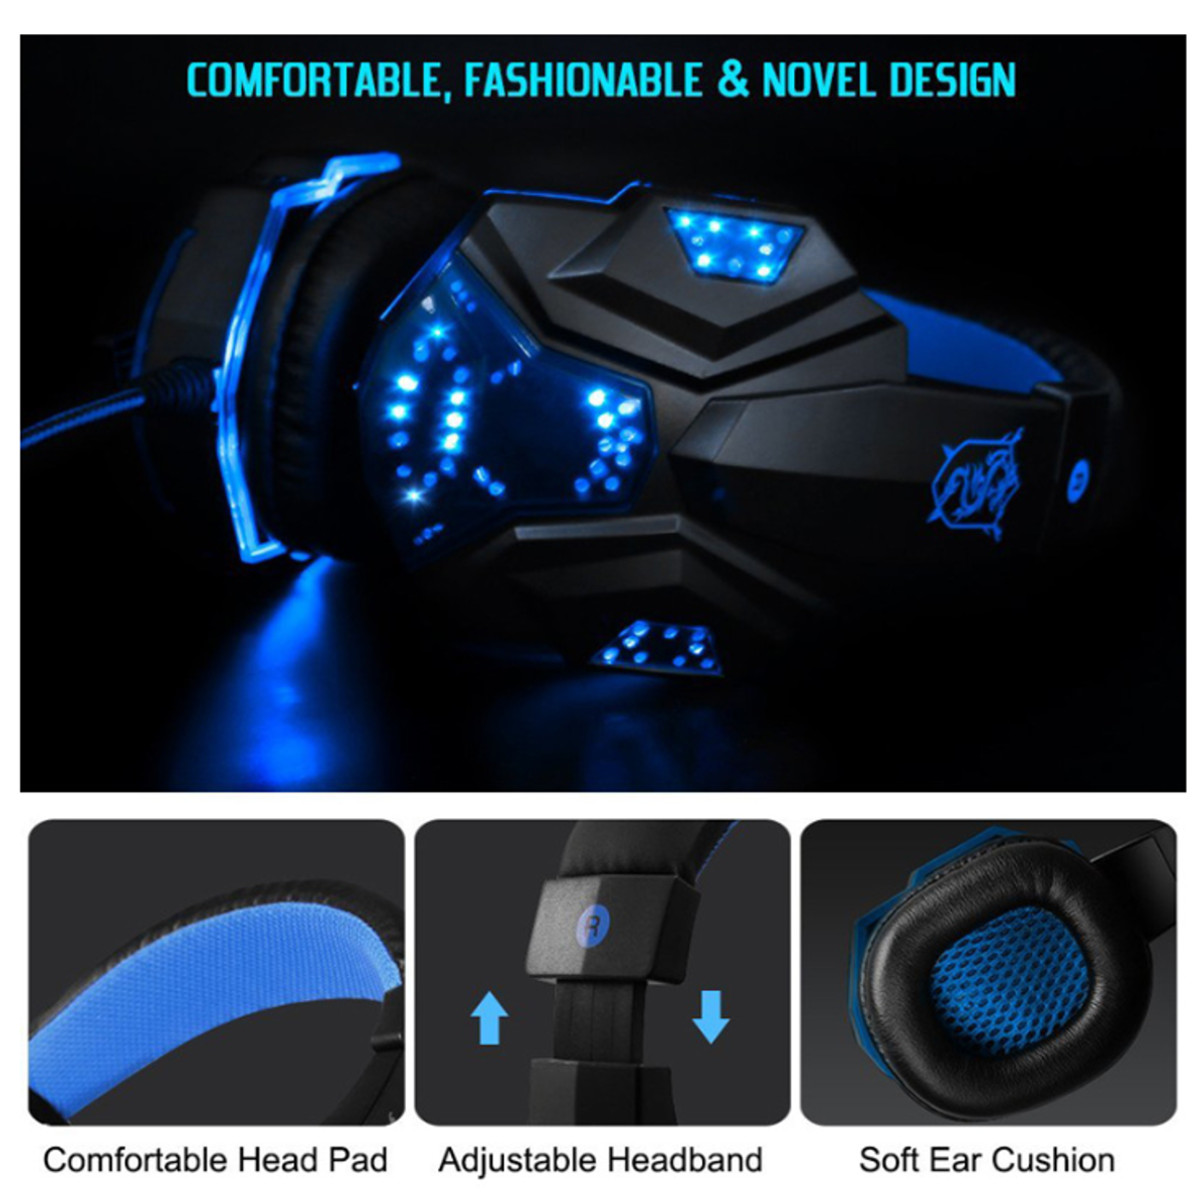 3.5mm USB Wired Gaming Headband Headphone with LED Light Surround Stereo Headset for XBOX PS4 Game Console Computer 14